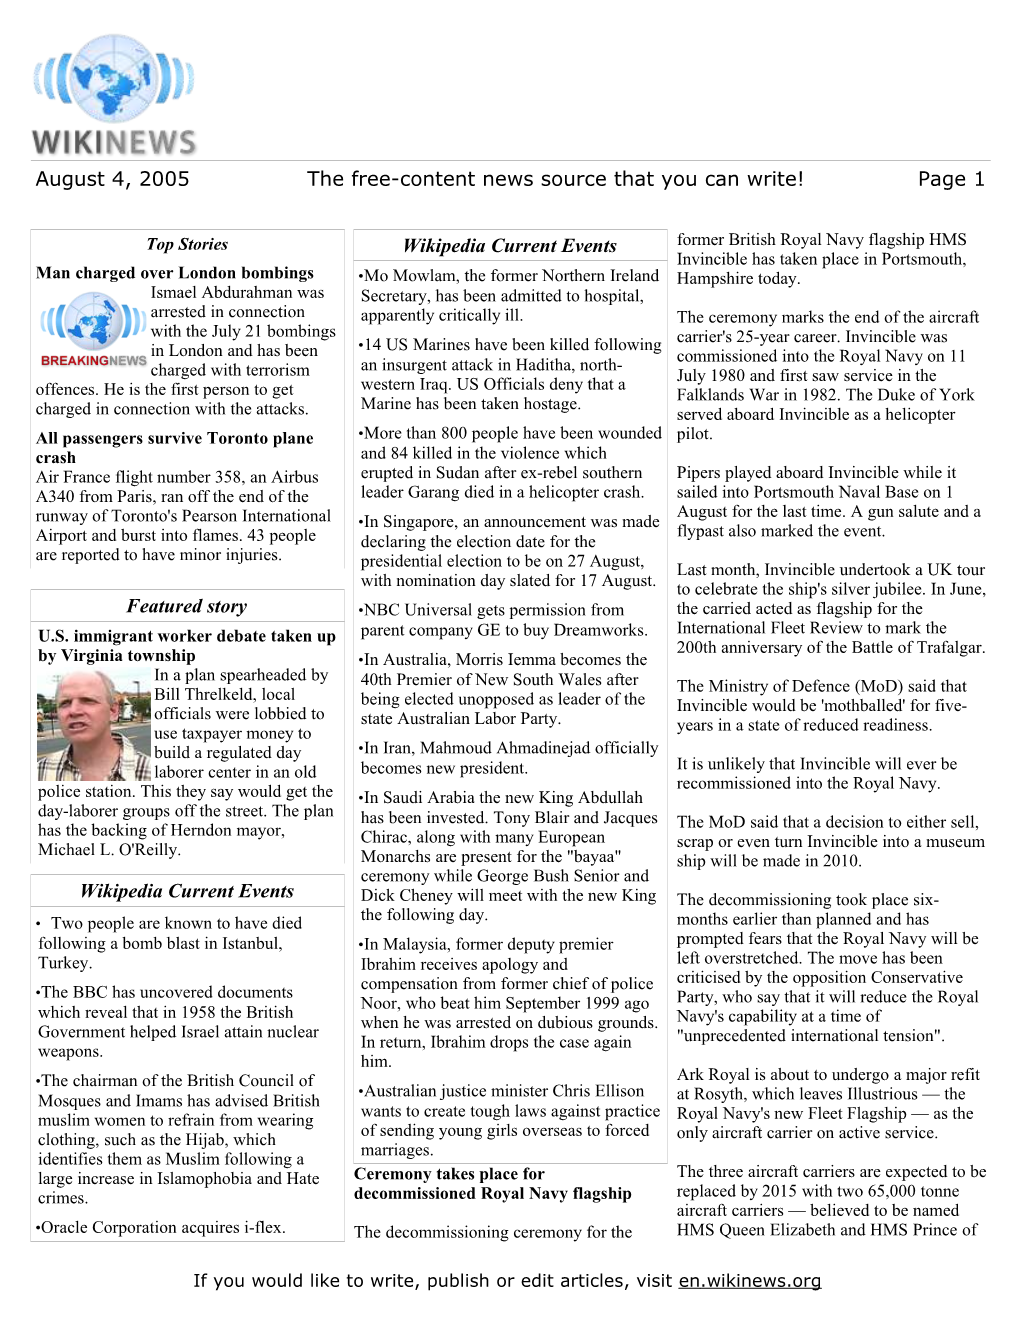 August 4, 2005 the Free-Content News Source That You Can Write! Page 1